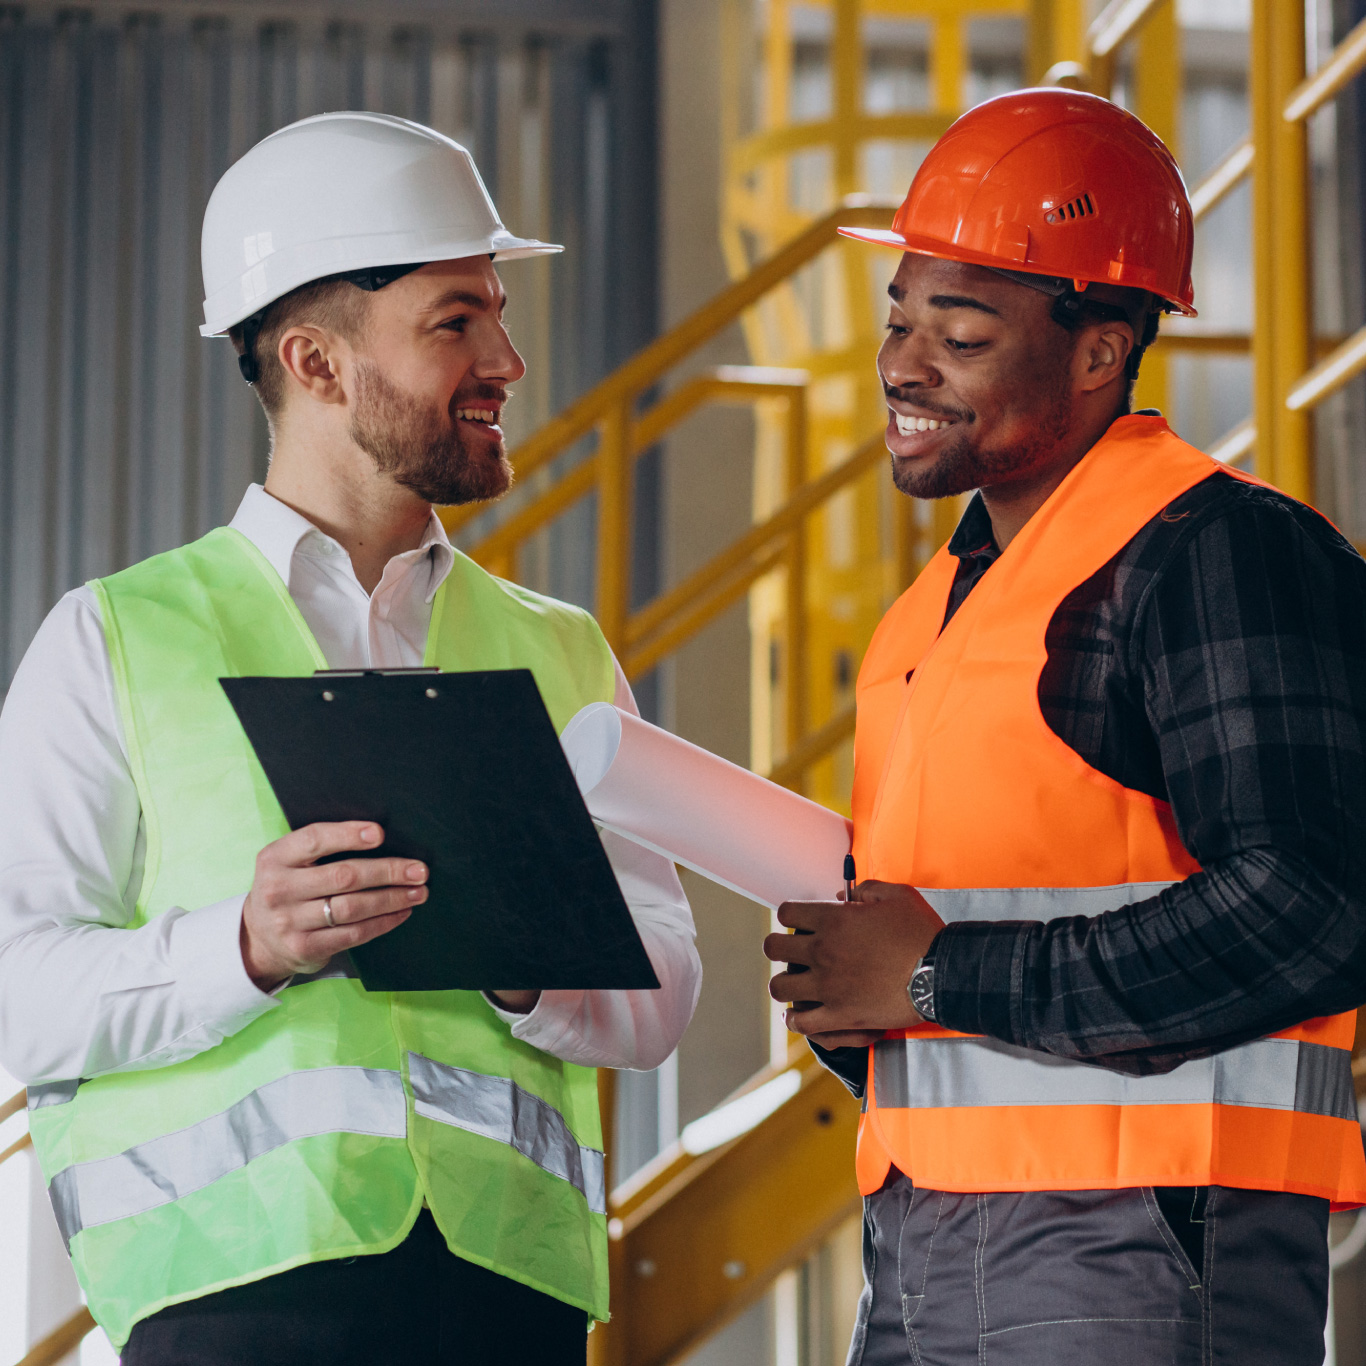 Two male construction workers wearing hard hats and high-vis vests talking and looking at a clipboard